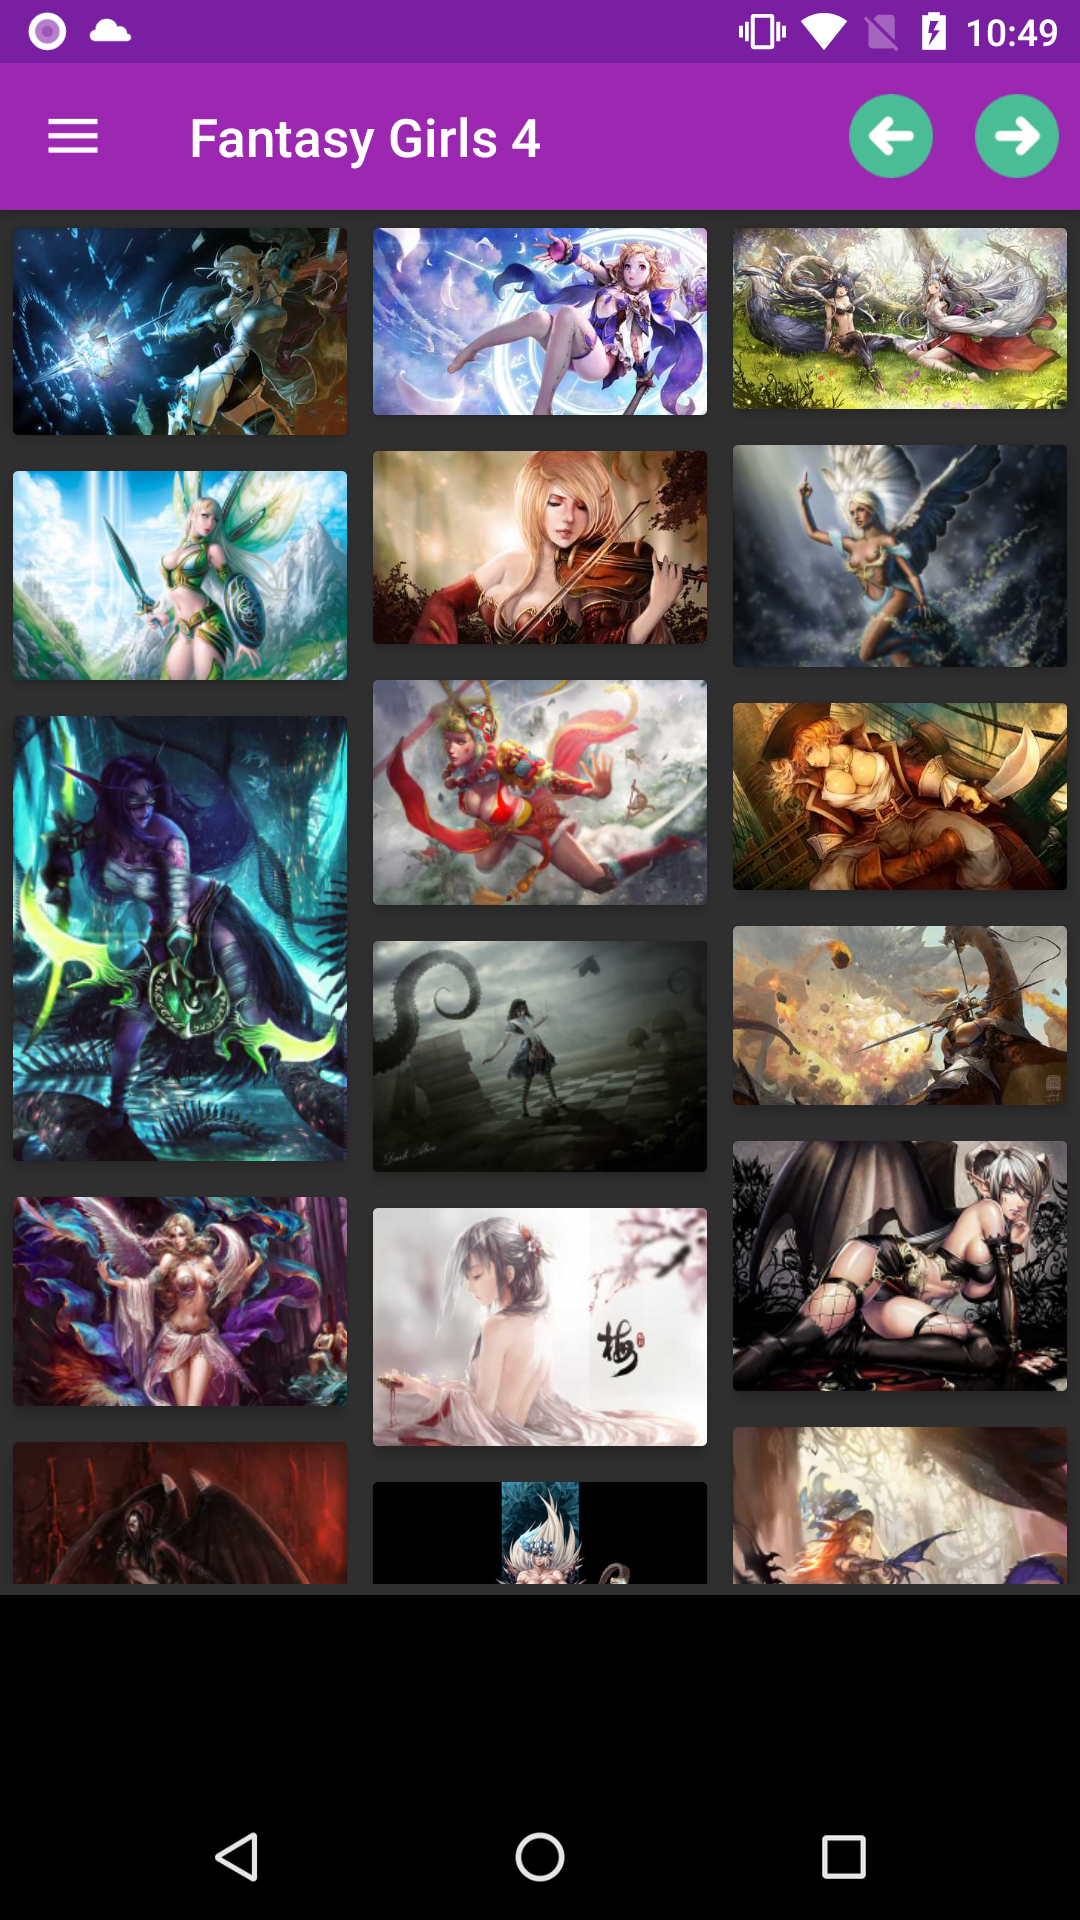 Fantasy Girls wallpapers android,watching,apps,for,wallpapers,hntai,apk,manga,pictures,picture,futanari,best,backgrounds,ios,app,download,galleries,pics,hentai,art,fantasy,porn,girls,sexy,collections